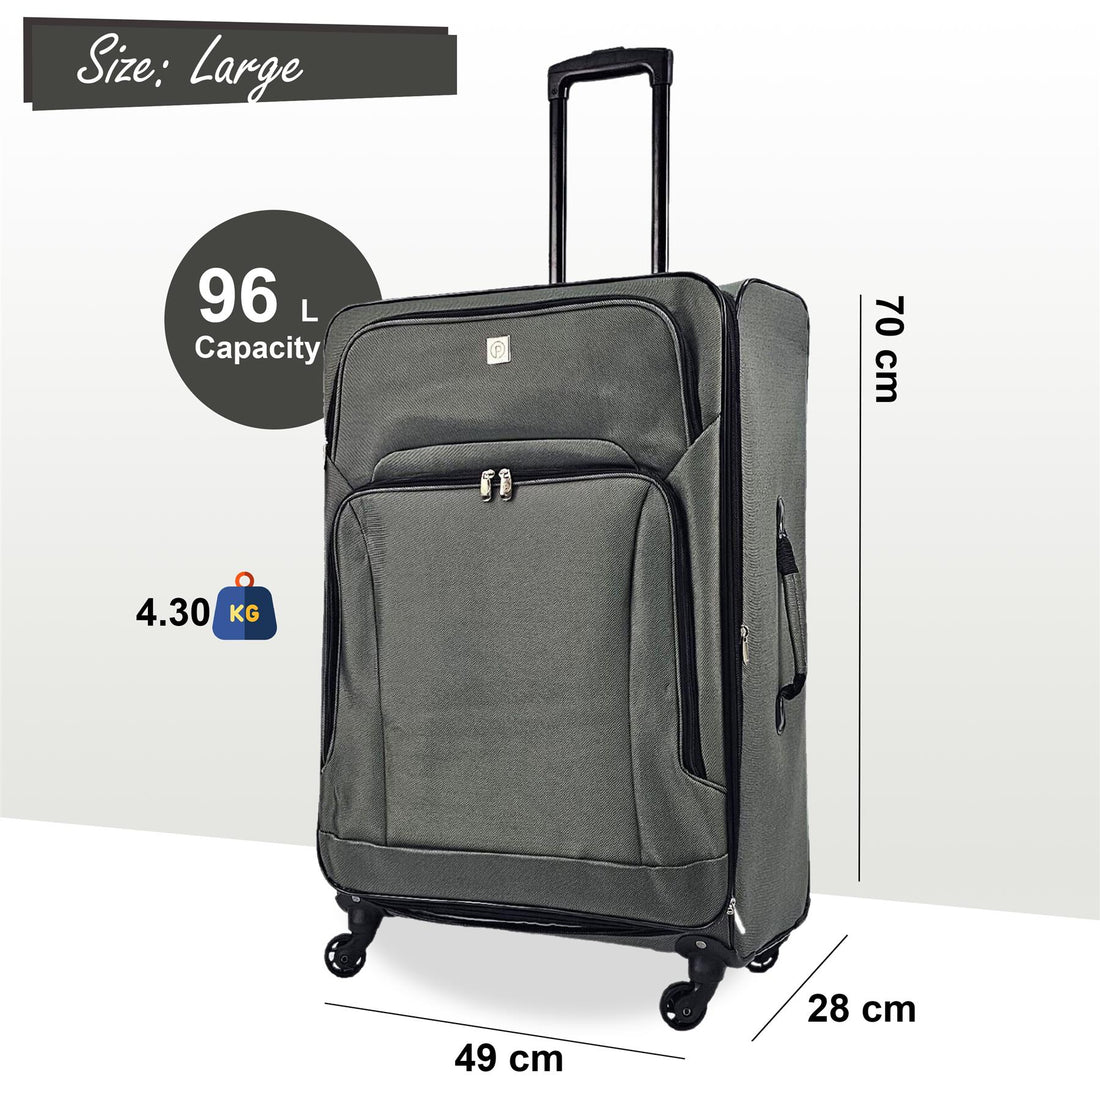 Coaling Large Soft Shell Suitcase in Grey